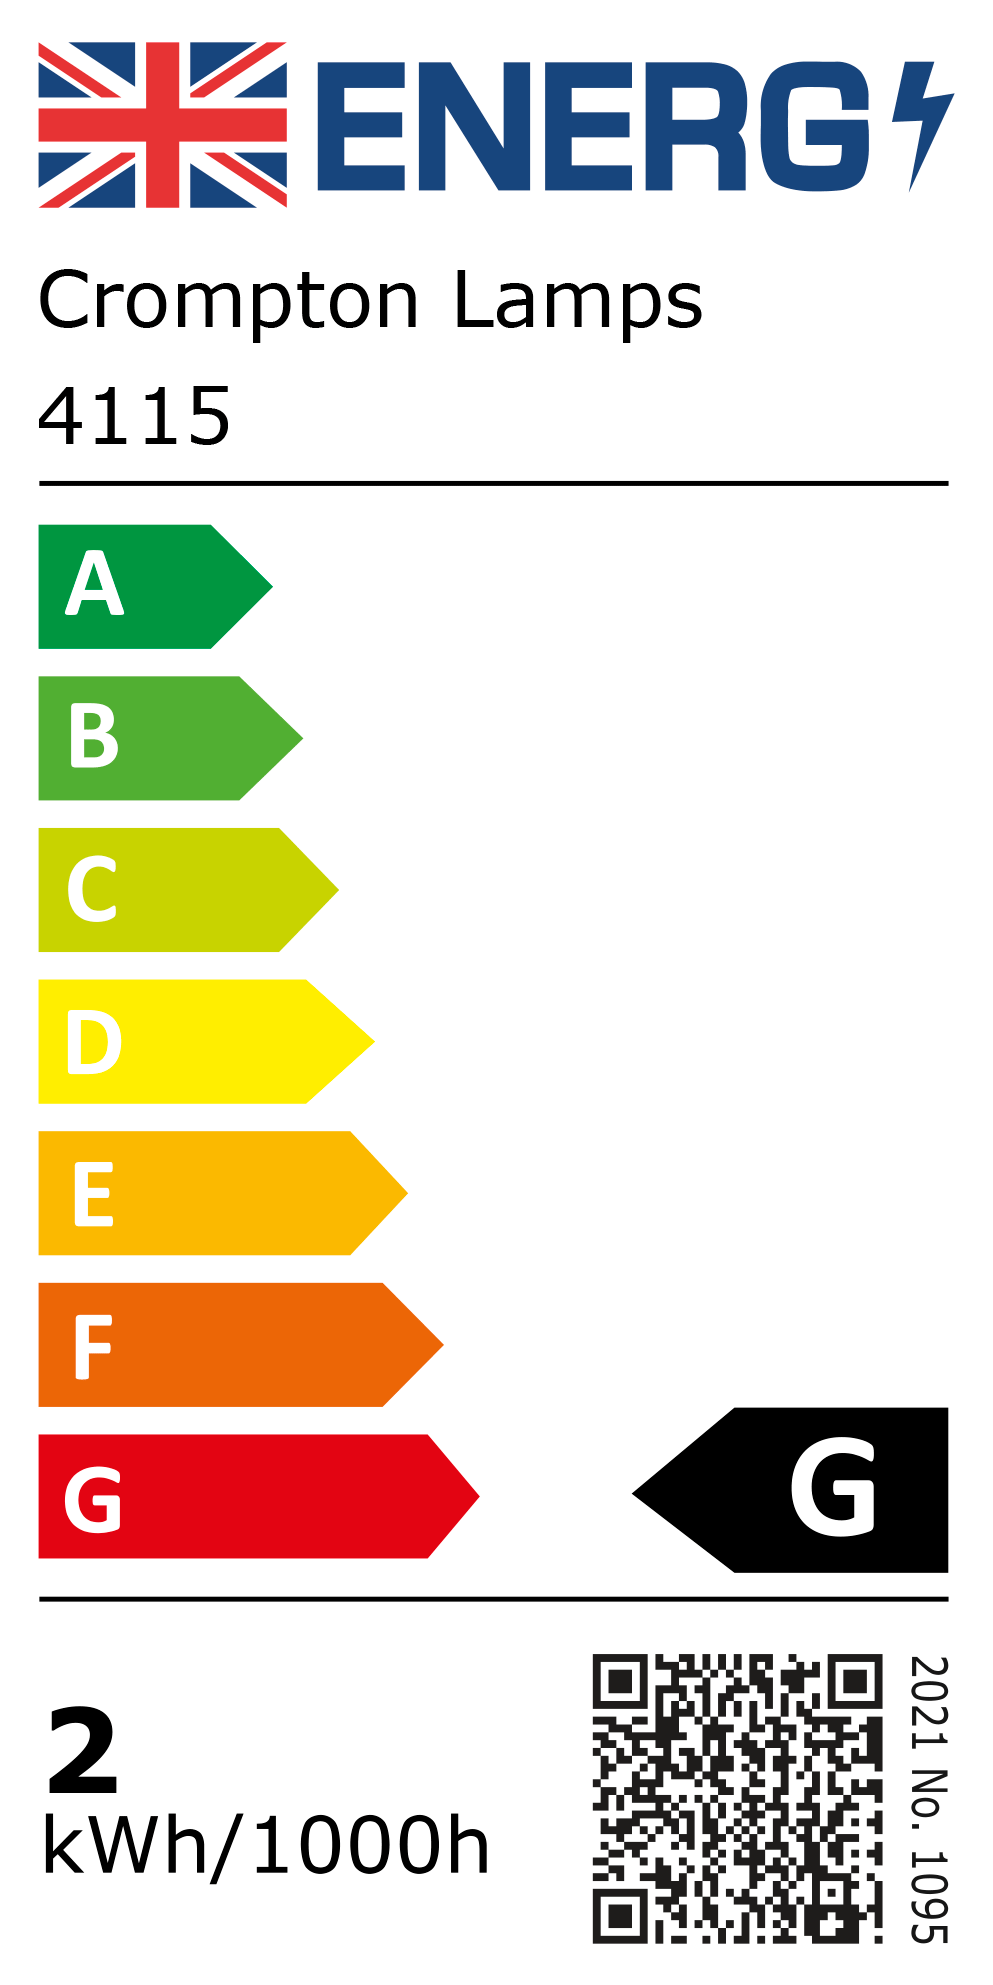 New 2021 Energy Rating Label: Stock Code 4115